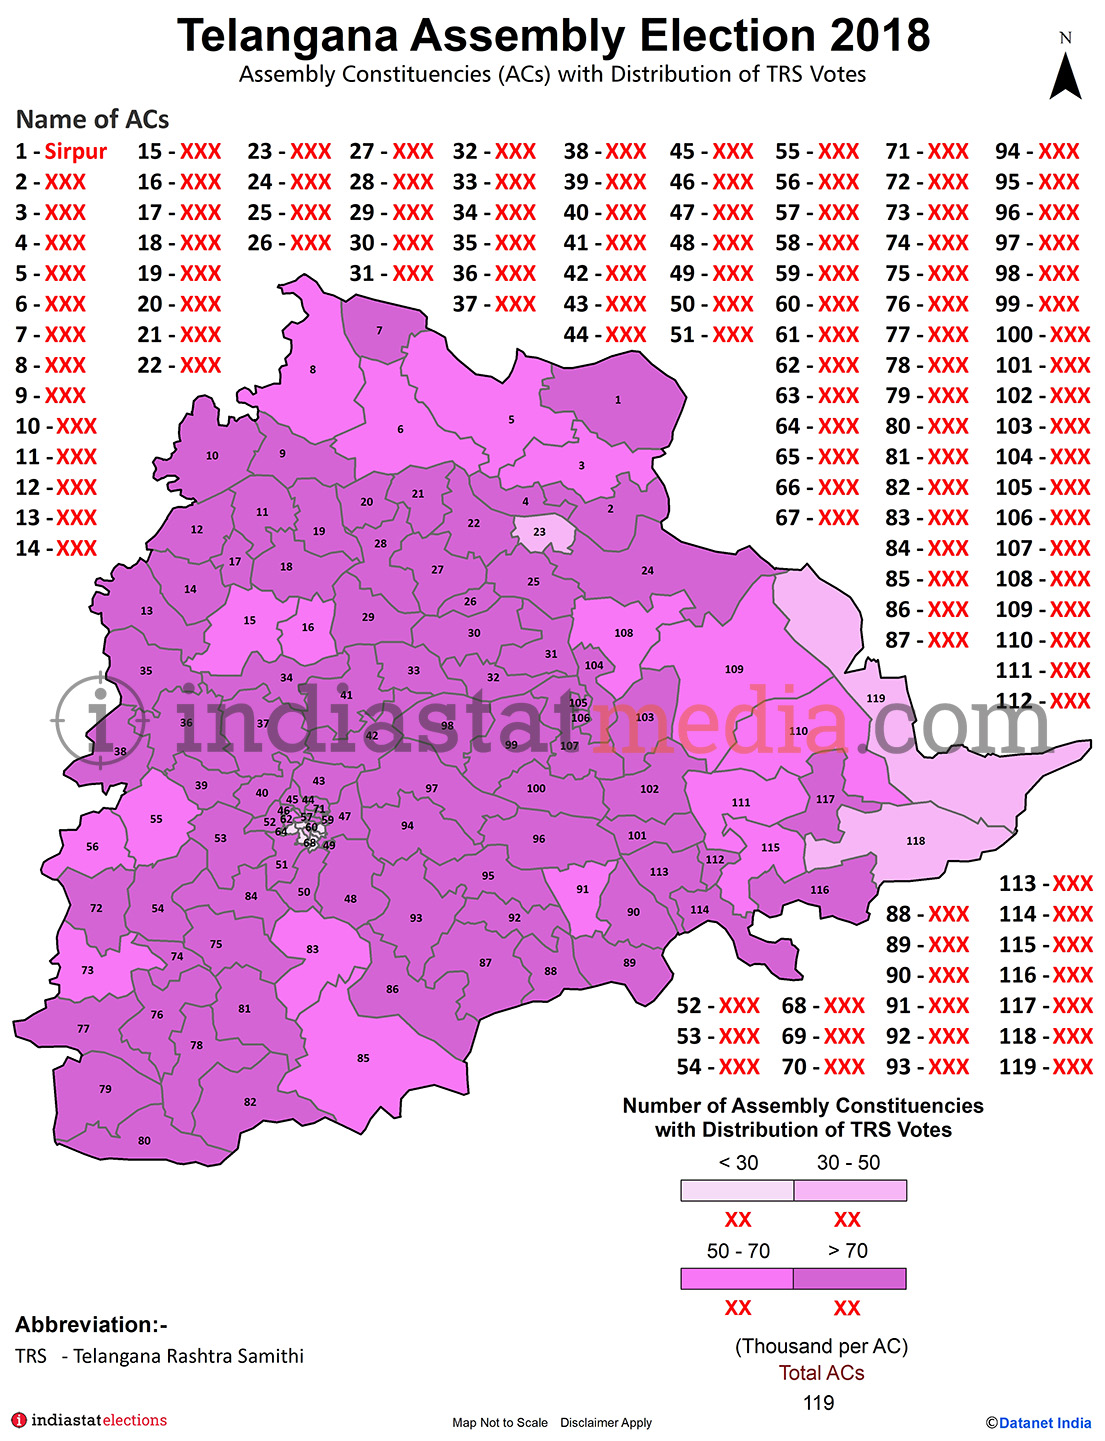 Distribution of TRS Votes by Constituencies in Telangana (Assembly Election - 2018)